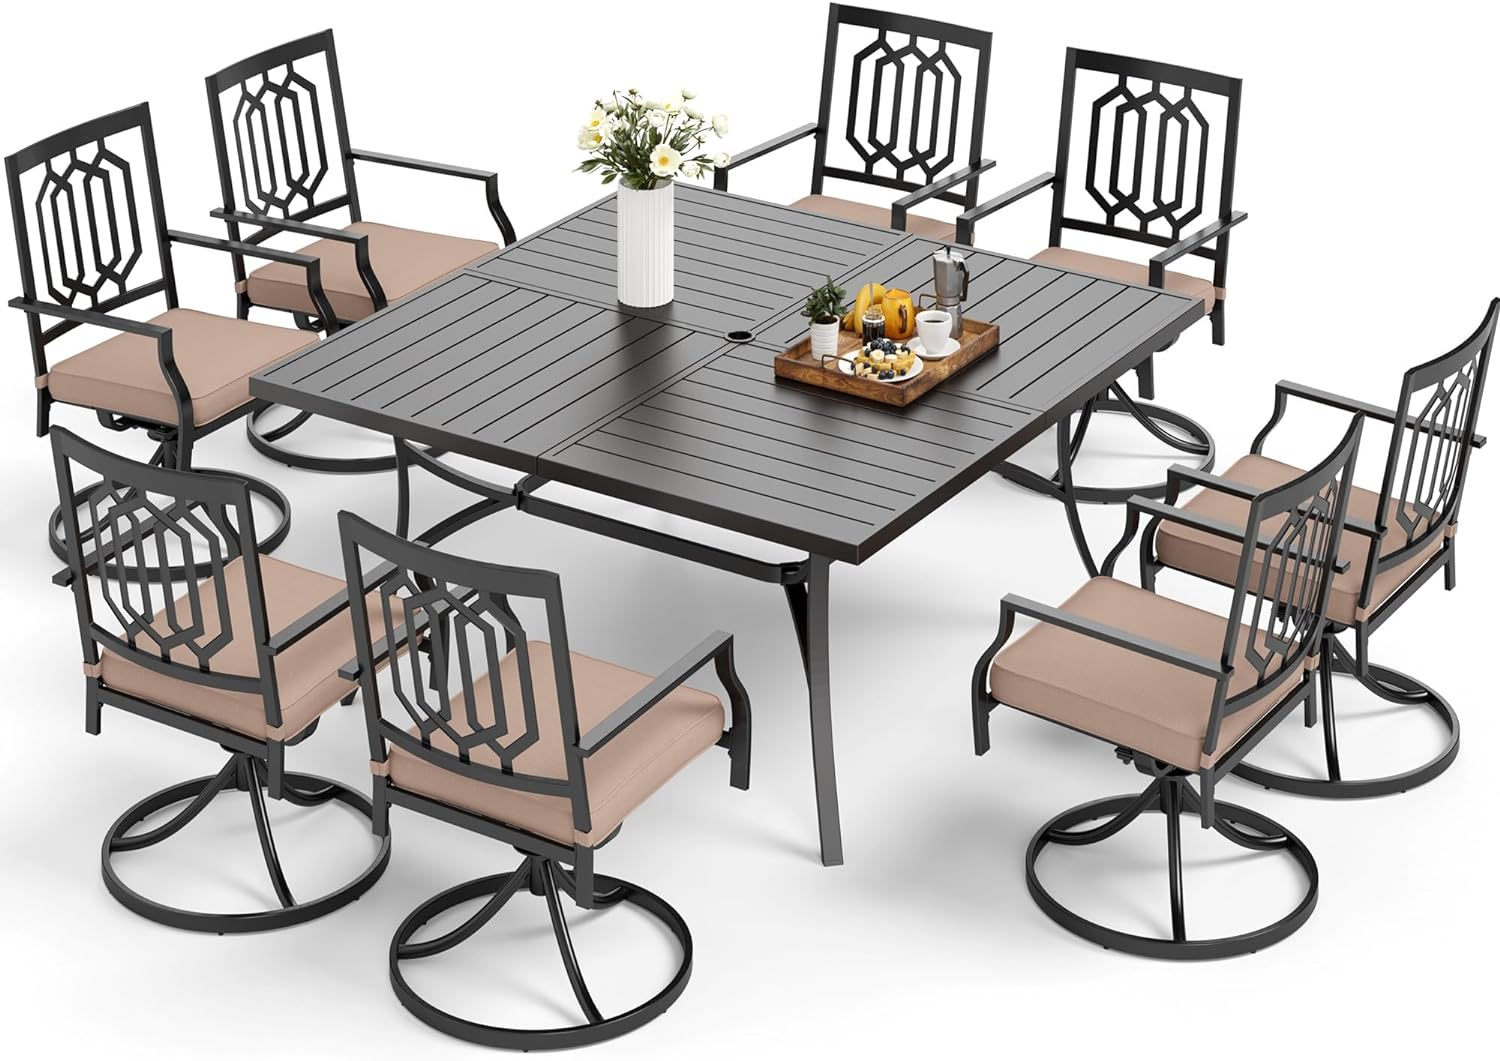 MFSTUDIO Patio Dining Set of 9 with Large Square Metal Slat Dining Table and 8 Swivel Metal Chair with Cushion, All Weather Outdoor Furniture for Lawn Backyard Garden